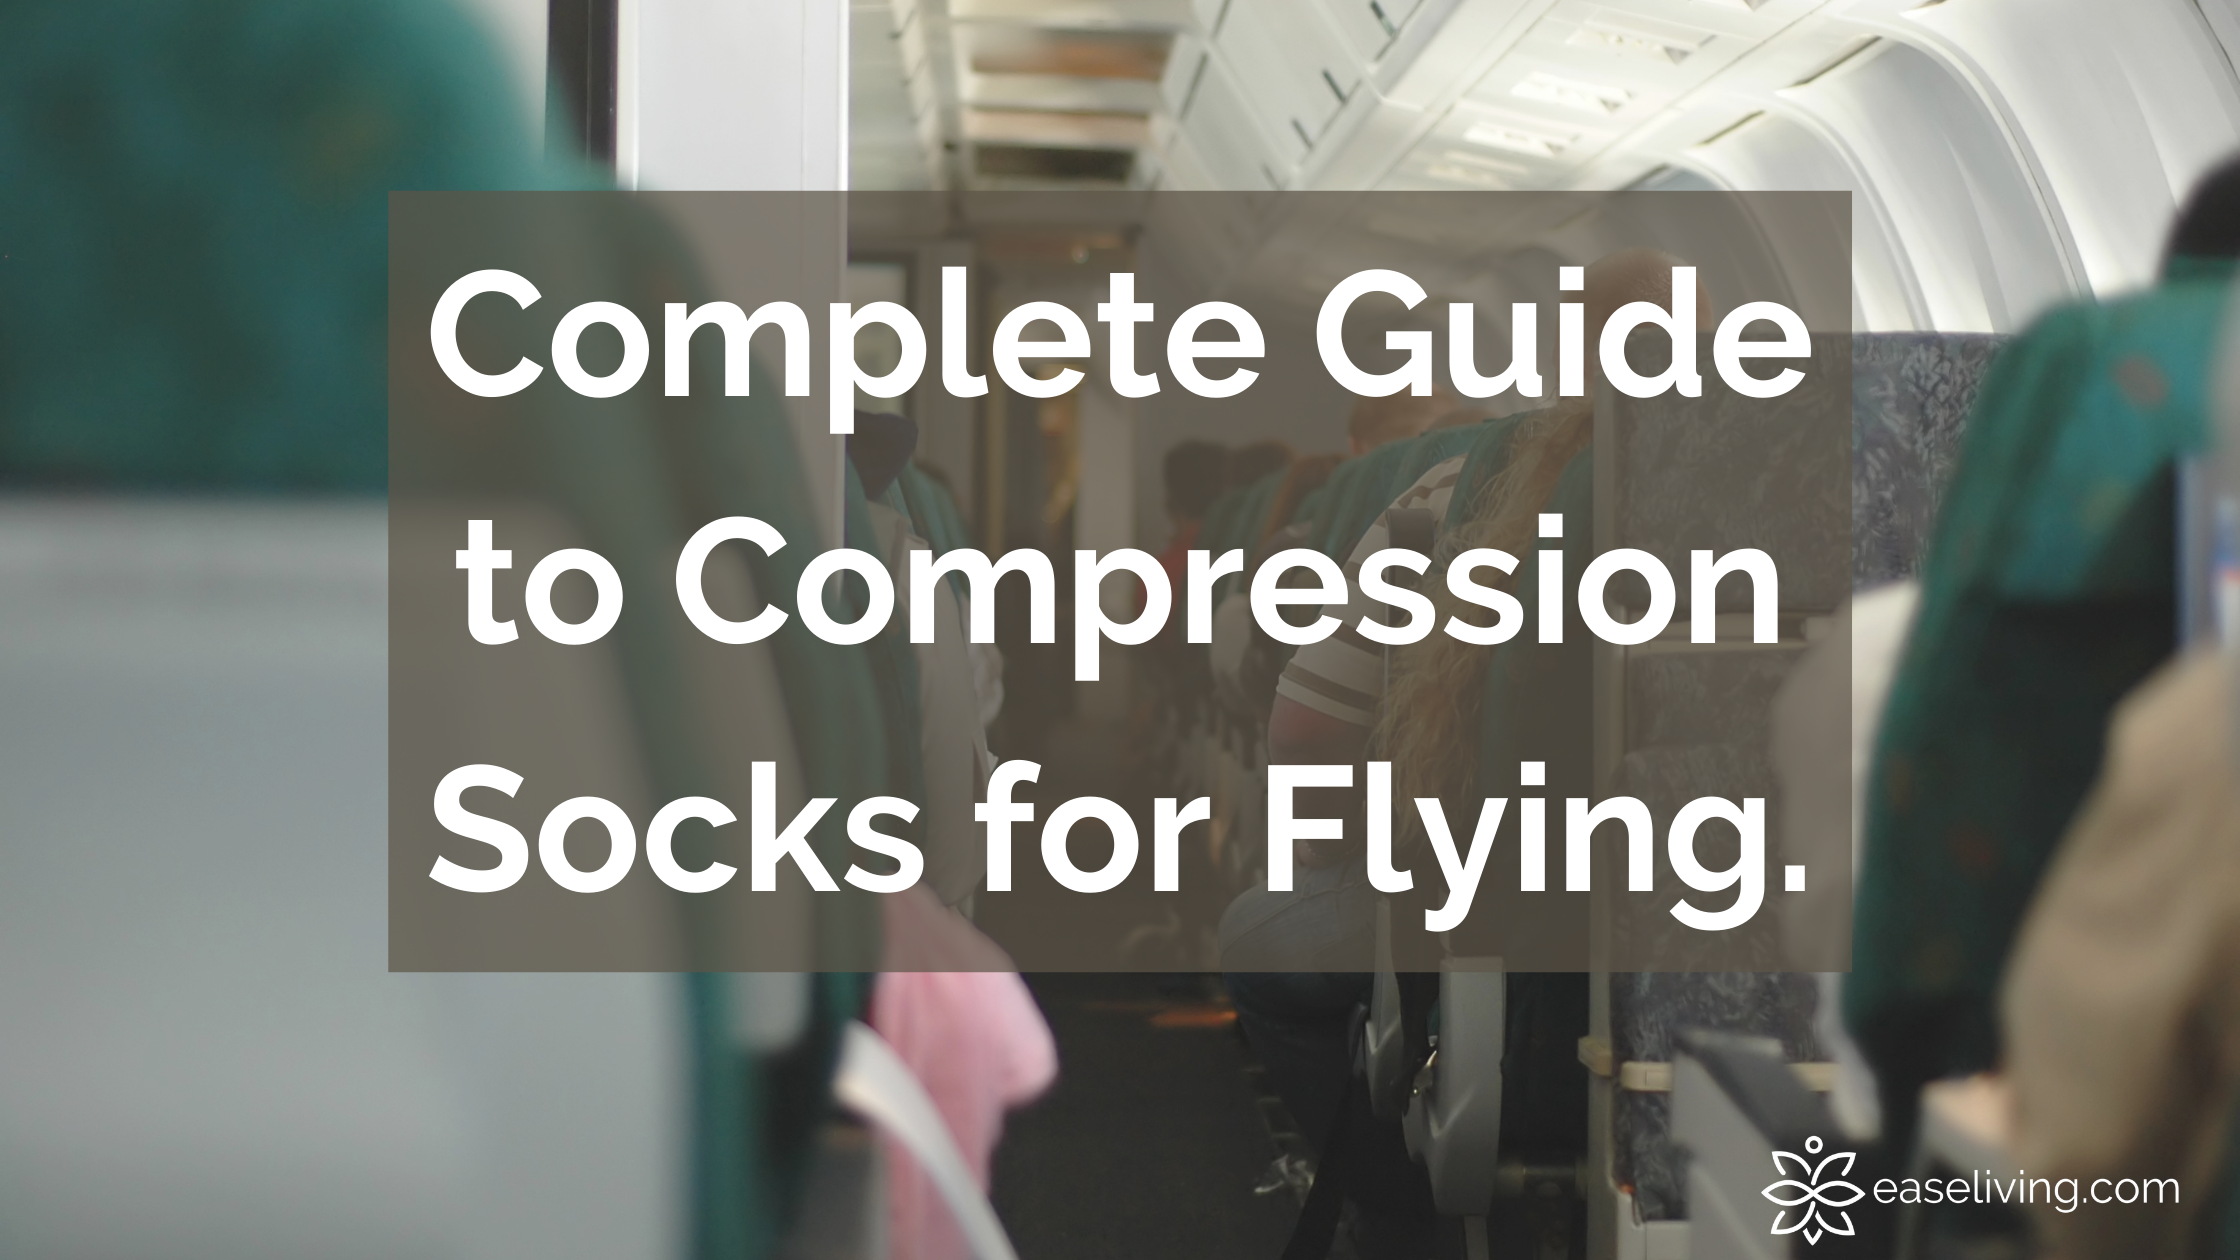 Long plane flight? Try compression socks to relieve circulation problems